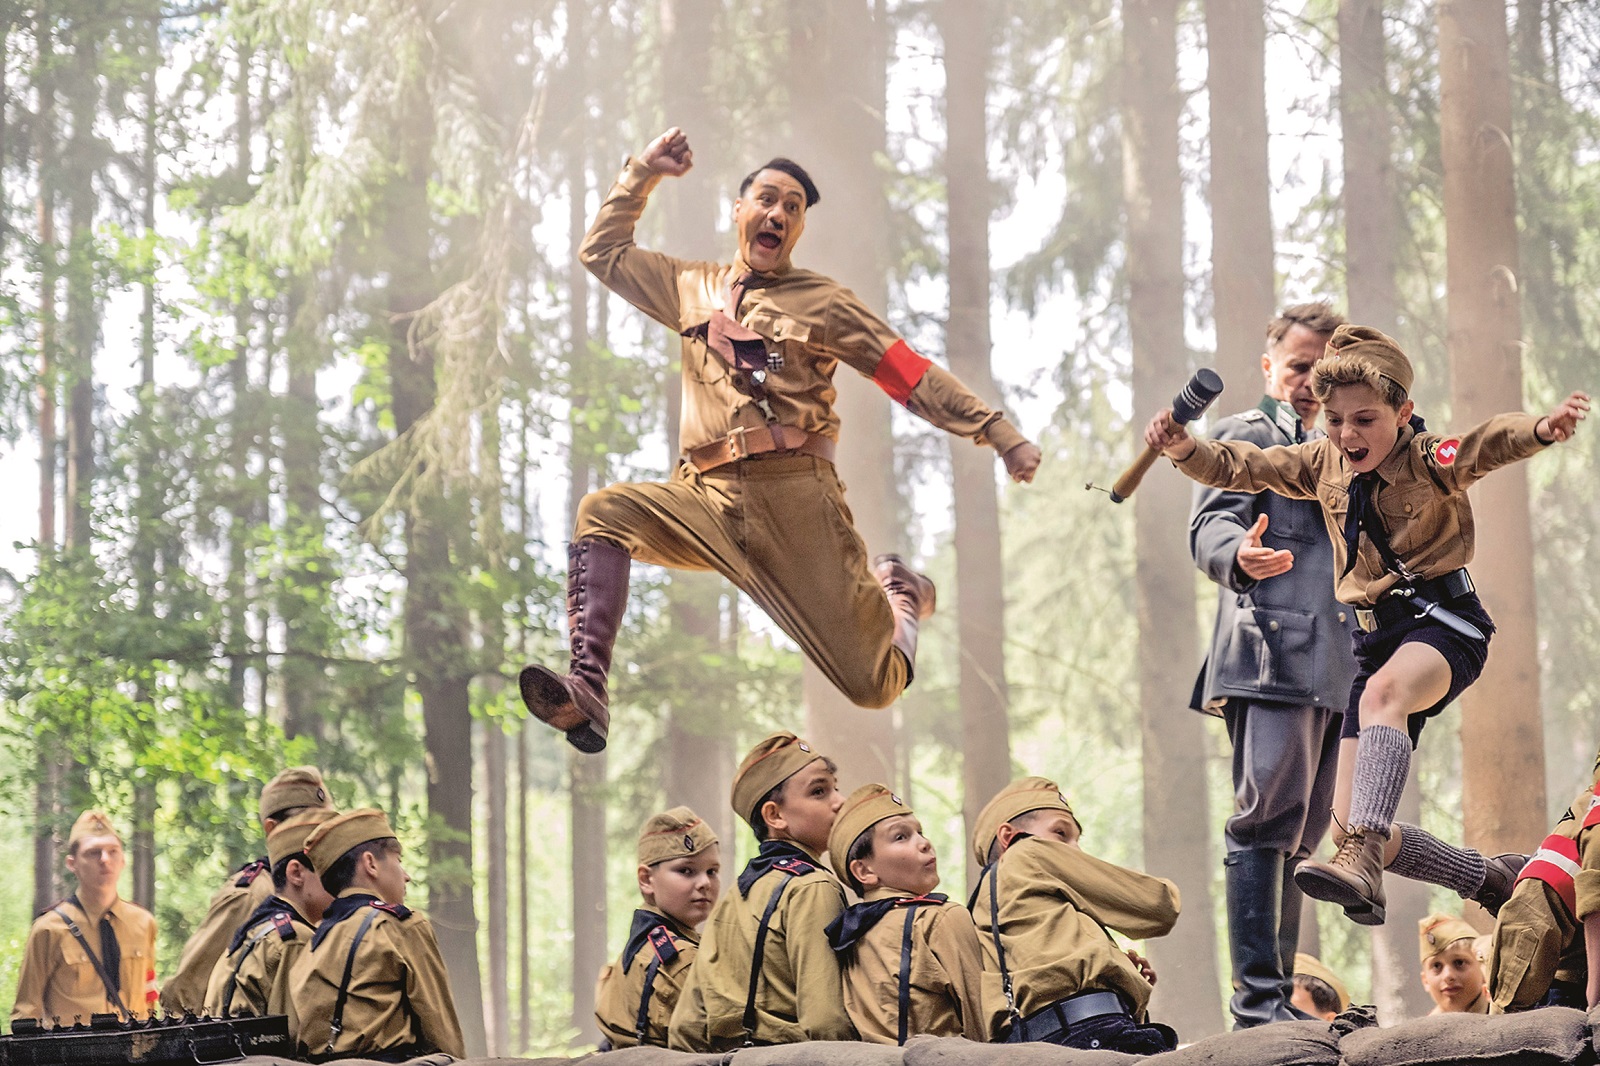 JOJO RABBIT, from left: Taika Waititi, Roman Griffin Davis, 2019. ph: Kimberly French / TM & copyright © Fox Searchlight Pictures. All rights reserved. / courtesy Everett Collection